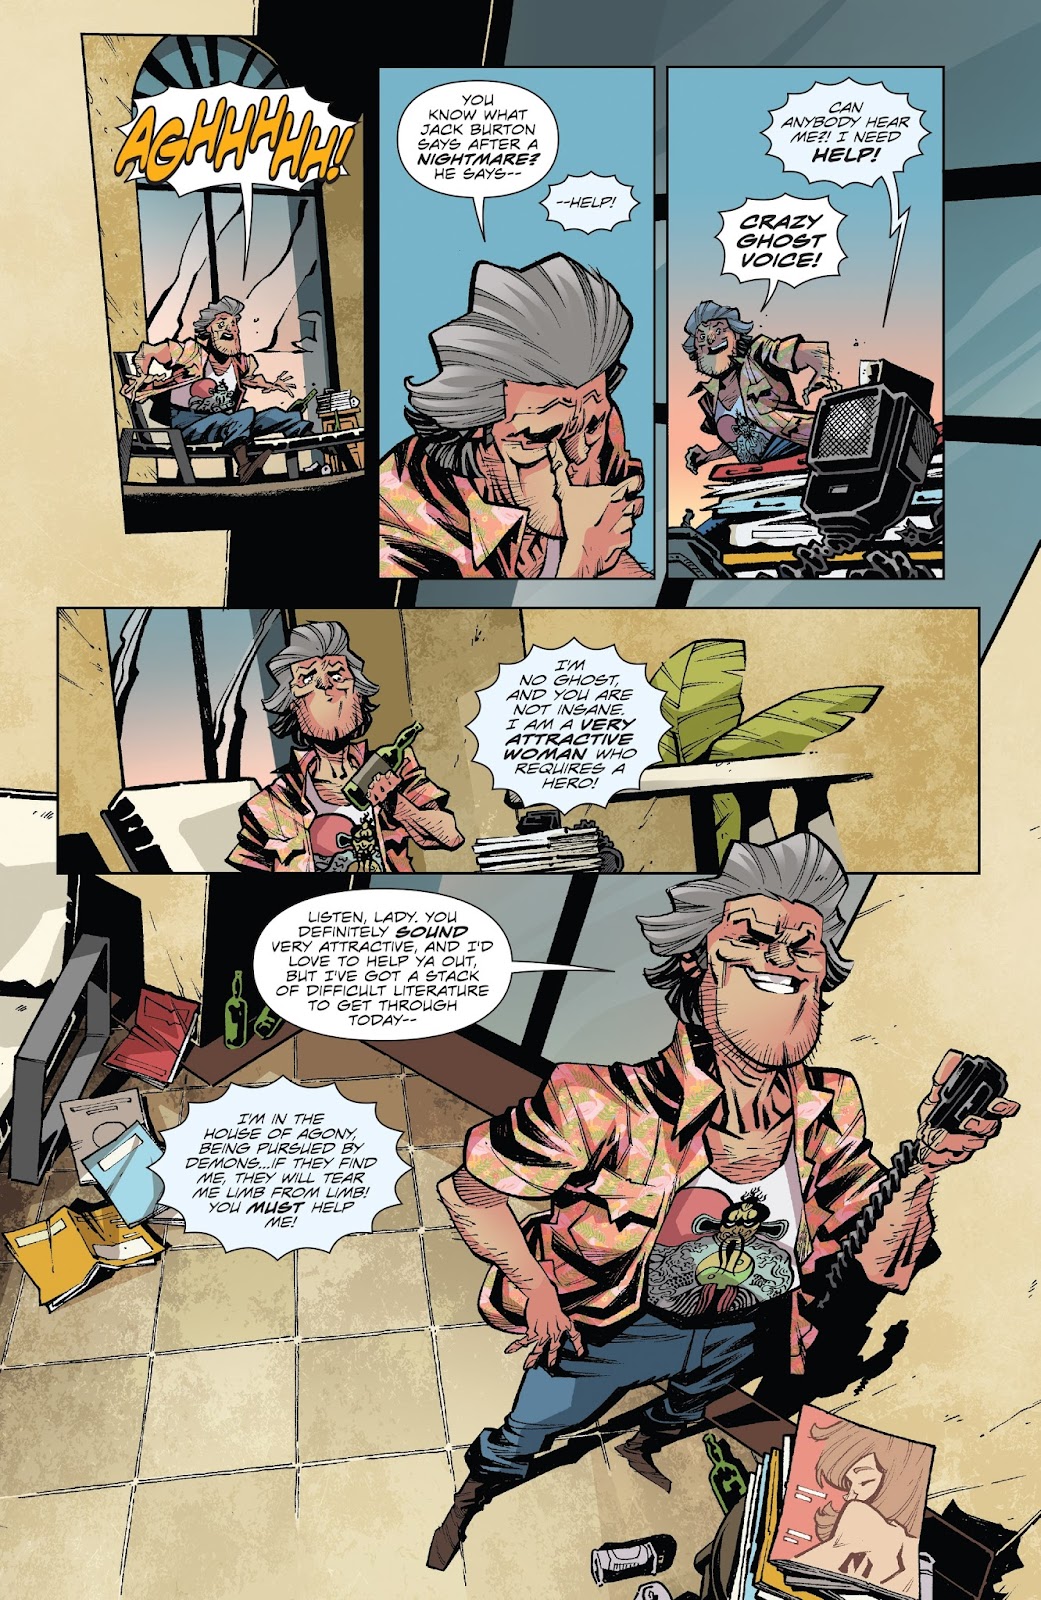 Big Trouble in Little China: Old Man Jack issue 1 - Page 8